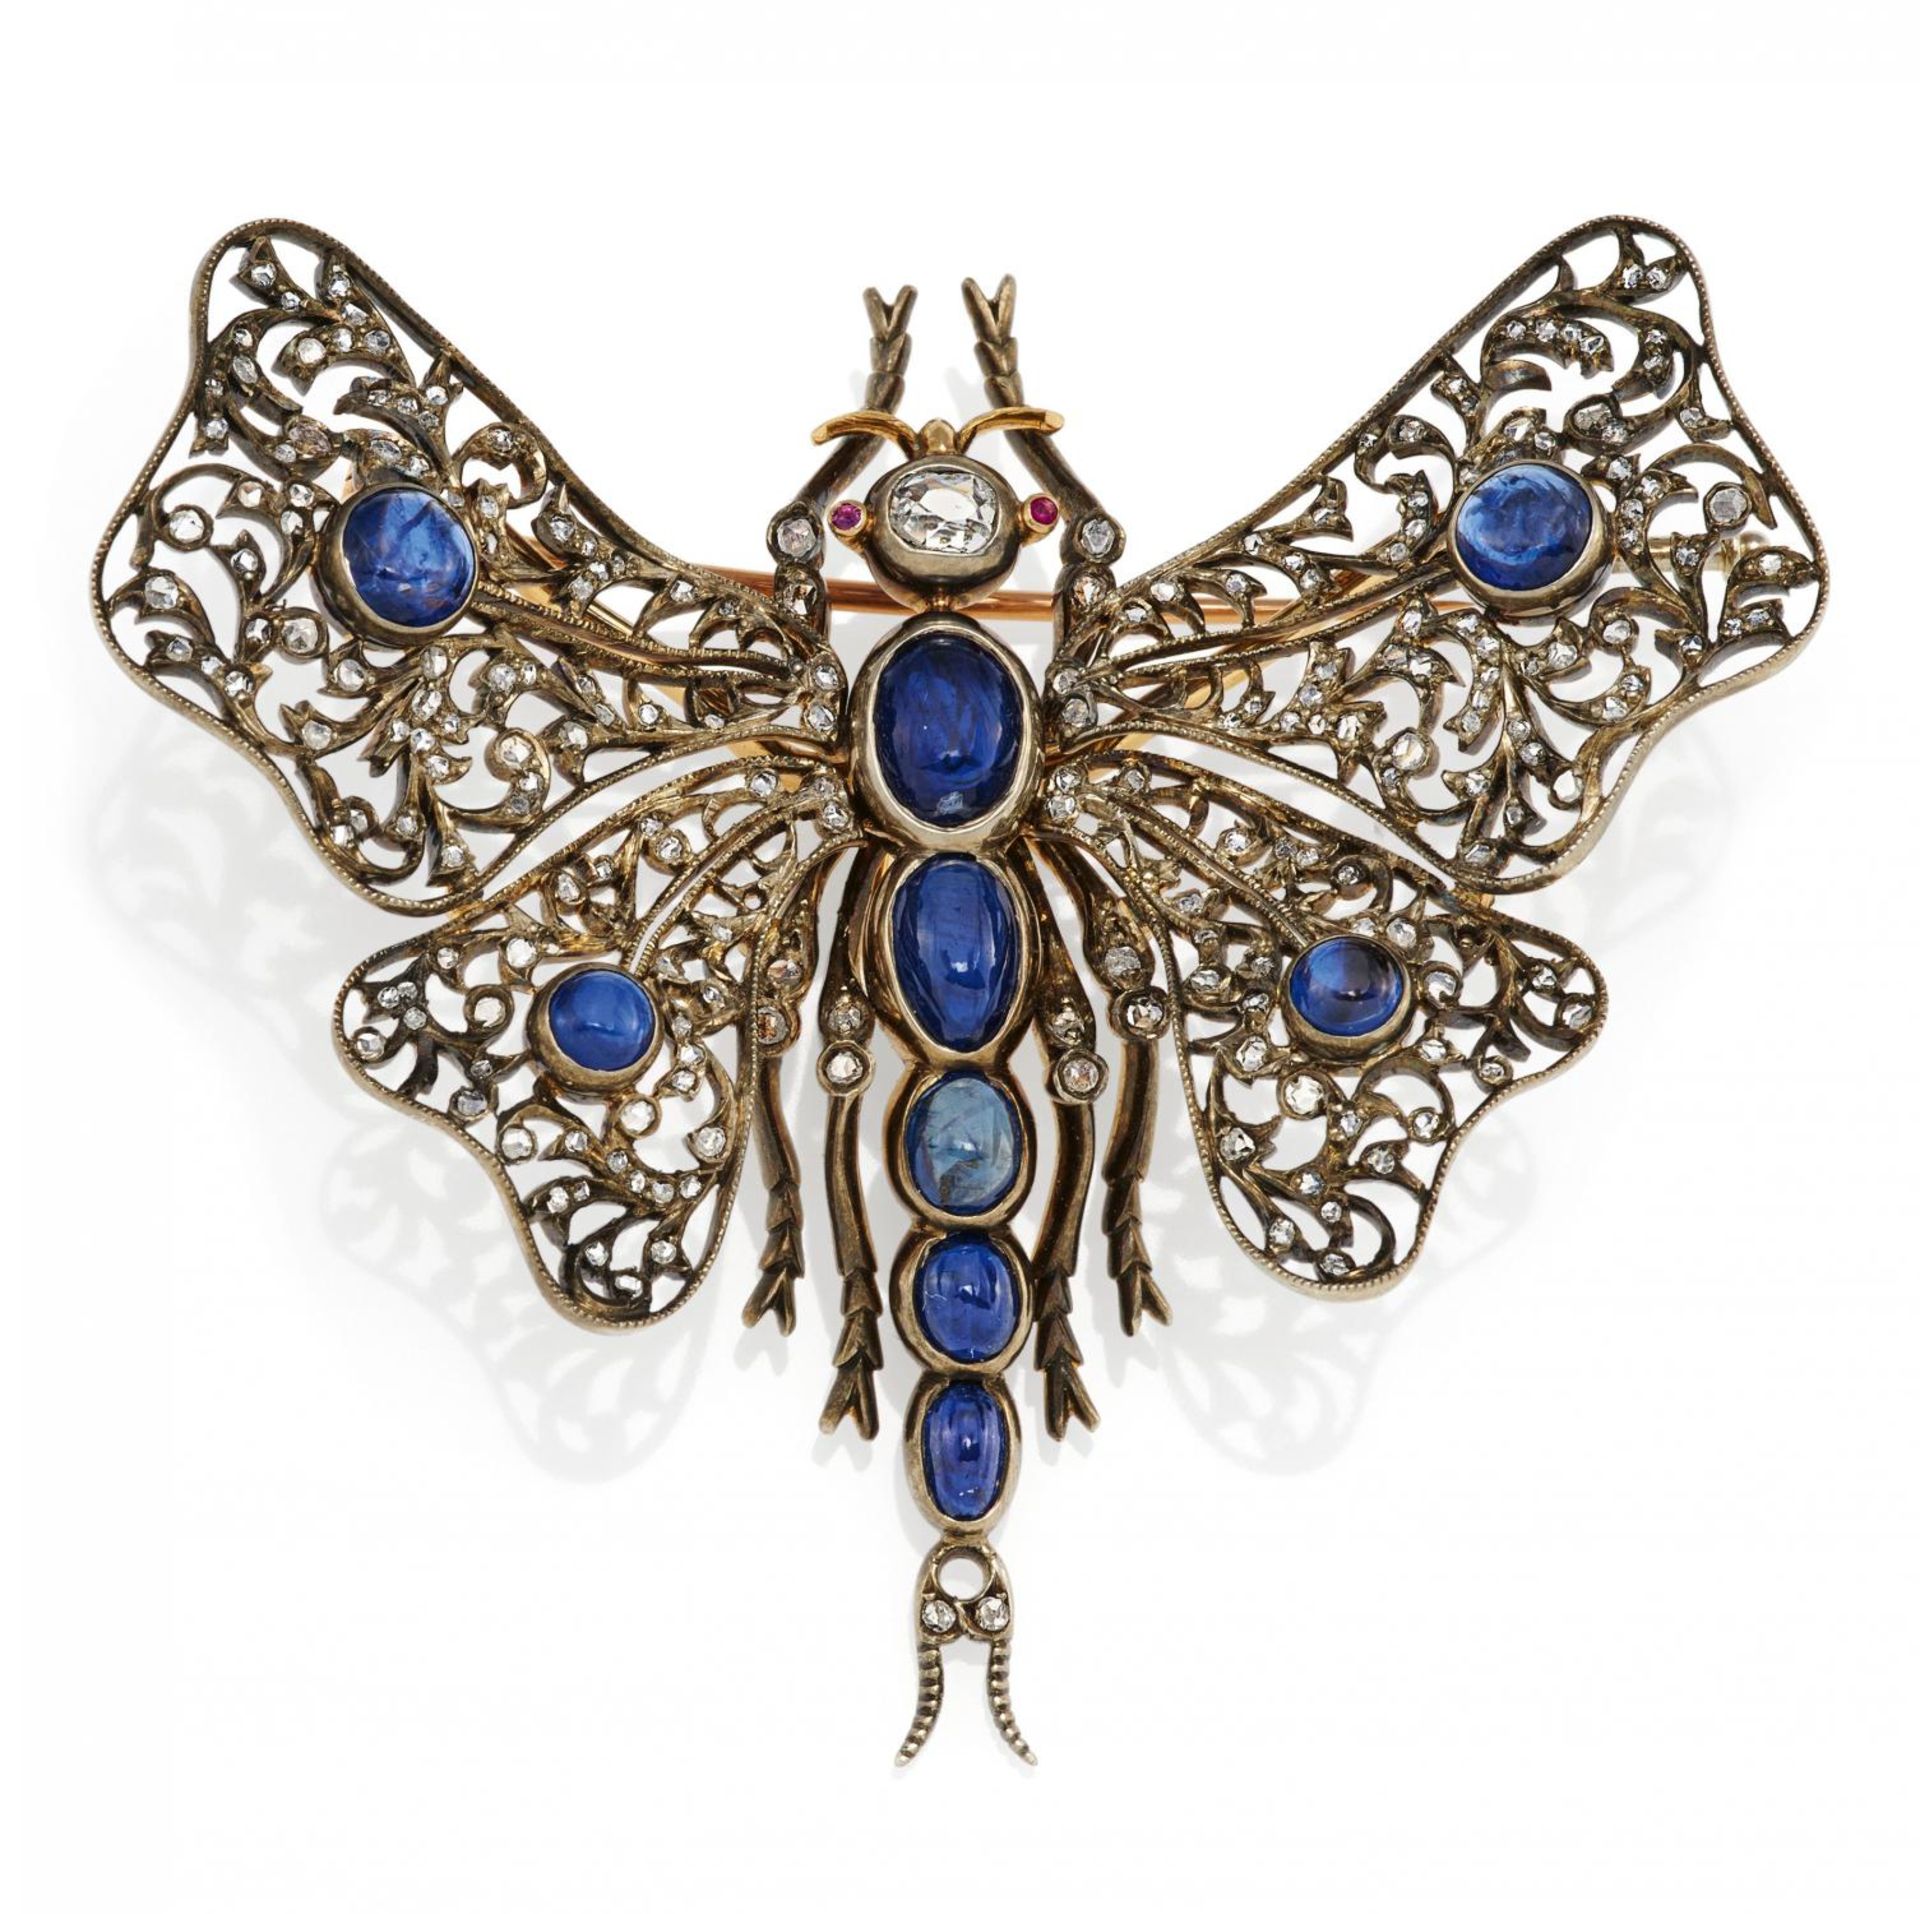 SAPPHIRE-DIAMOND-BROOCH. Date: 1900s. Material: Silver, 750/- yellow gold-plated, tested. Total